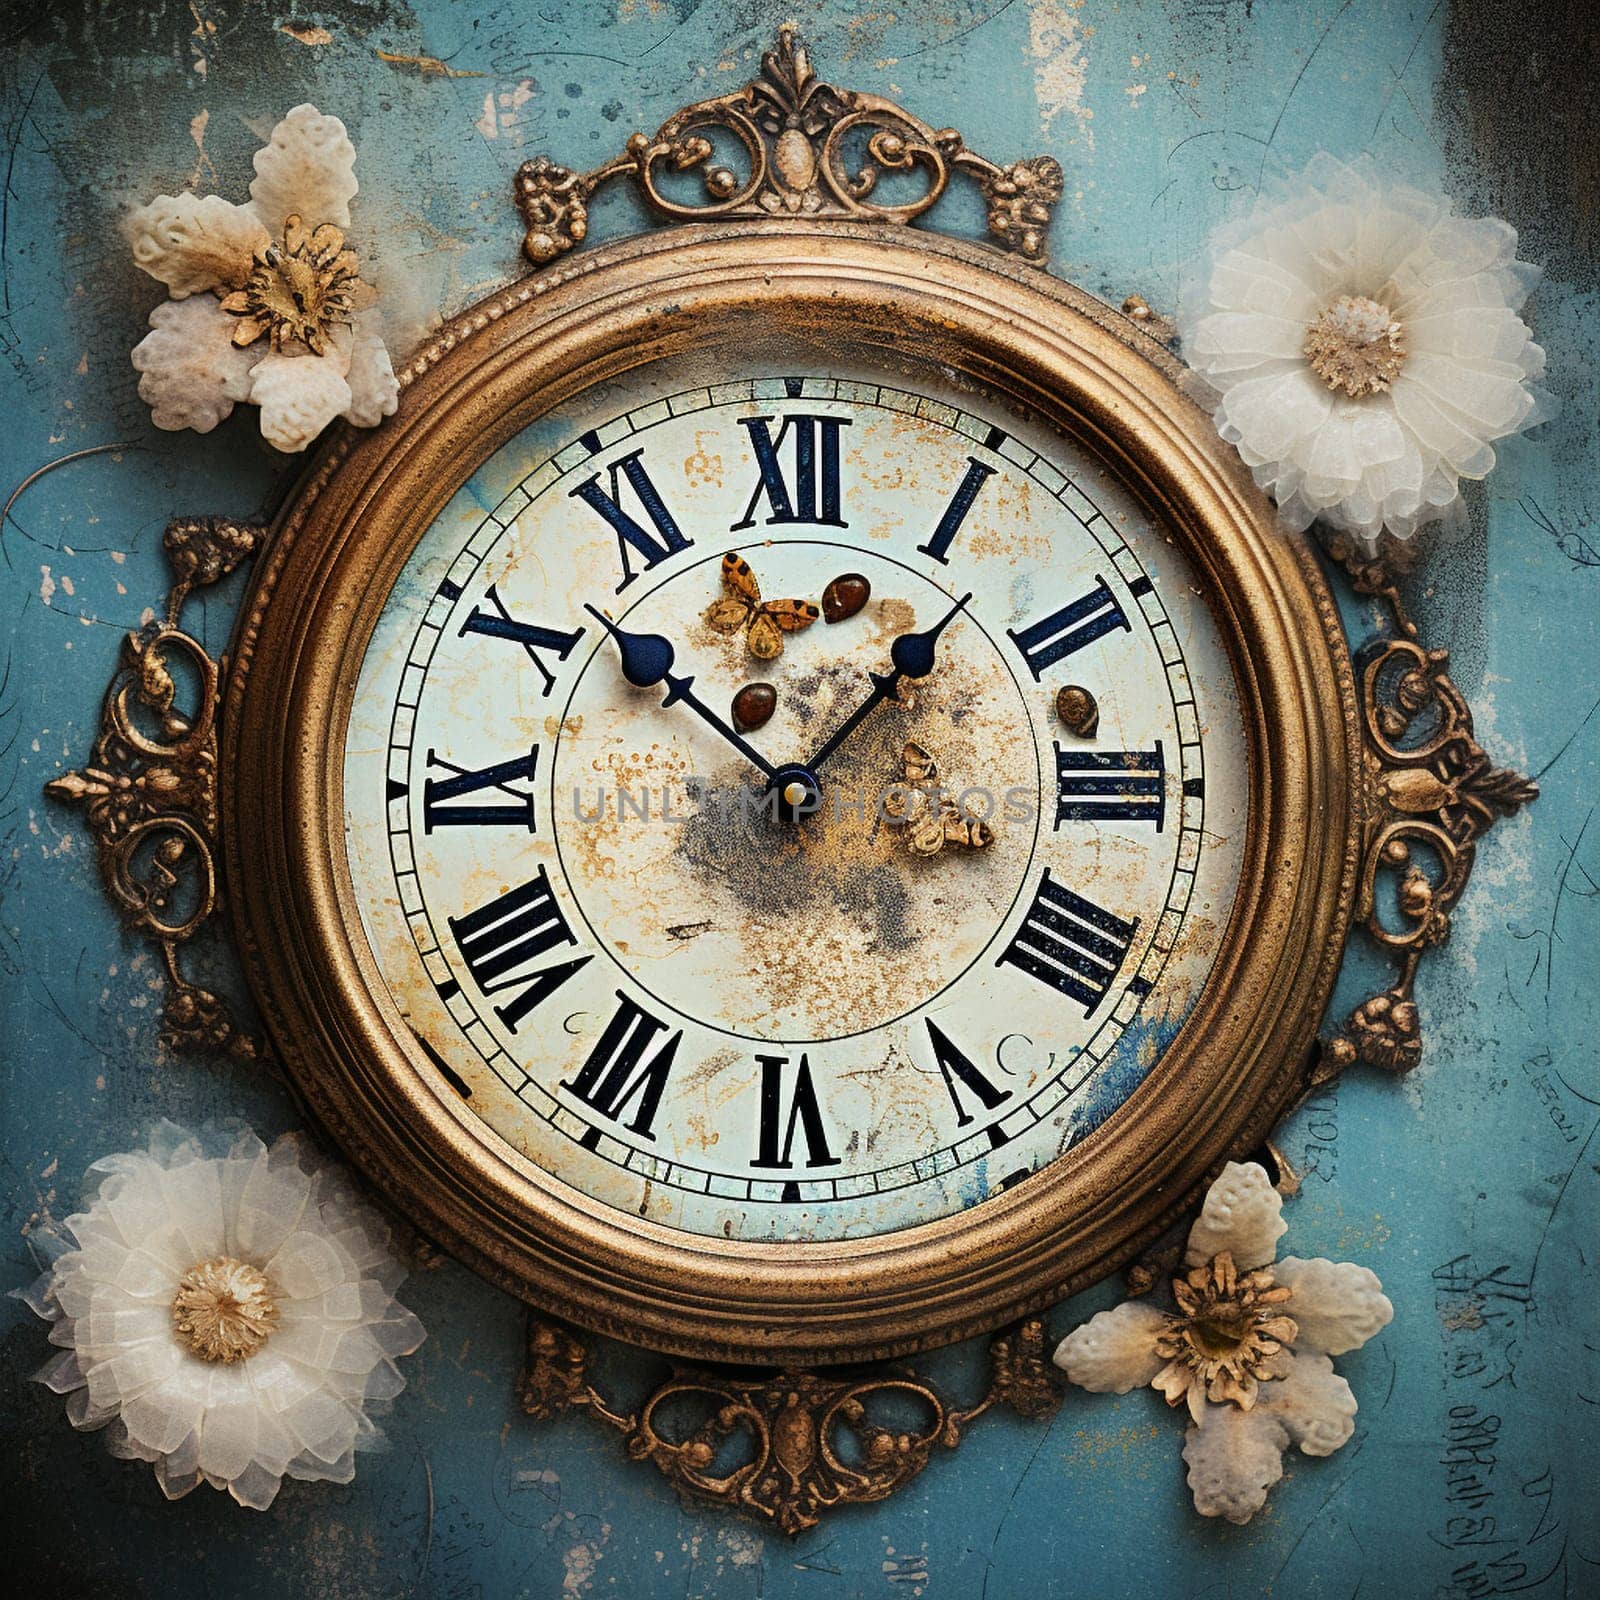 Step into a world of nostalgia with this visually captivating image of a vintage clock with a whimsical twist. This composition captures the essence of "Ticking Stories: Vintage Clocks as Time-Keepers of Memories," incorporating elements of nostalgia and storytelling. The clock, adorned with intricate details and embellishments, serves as a time-keeper of cherished memories. With its unique twist, this image offers high commercial appeal and is suitable for microstock sites.